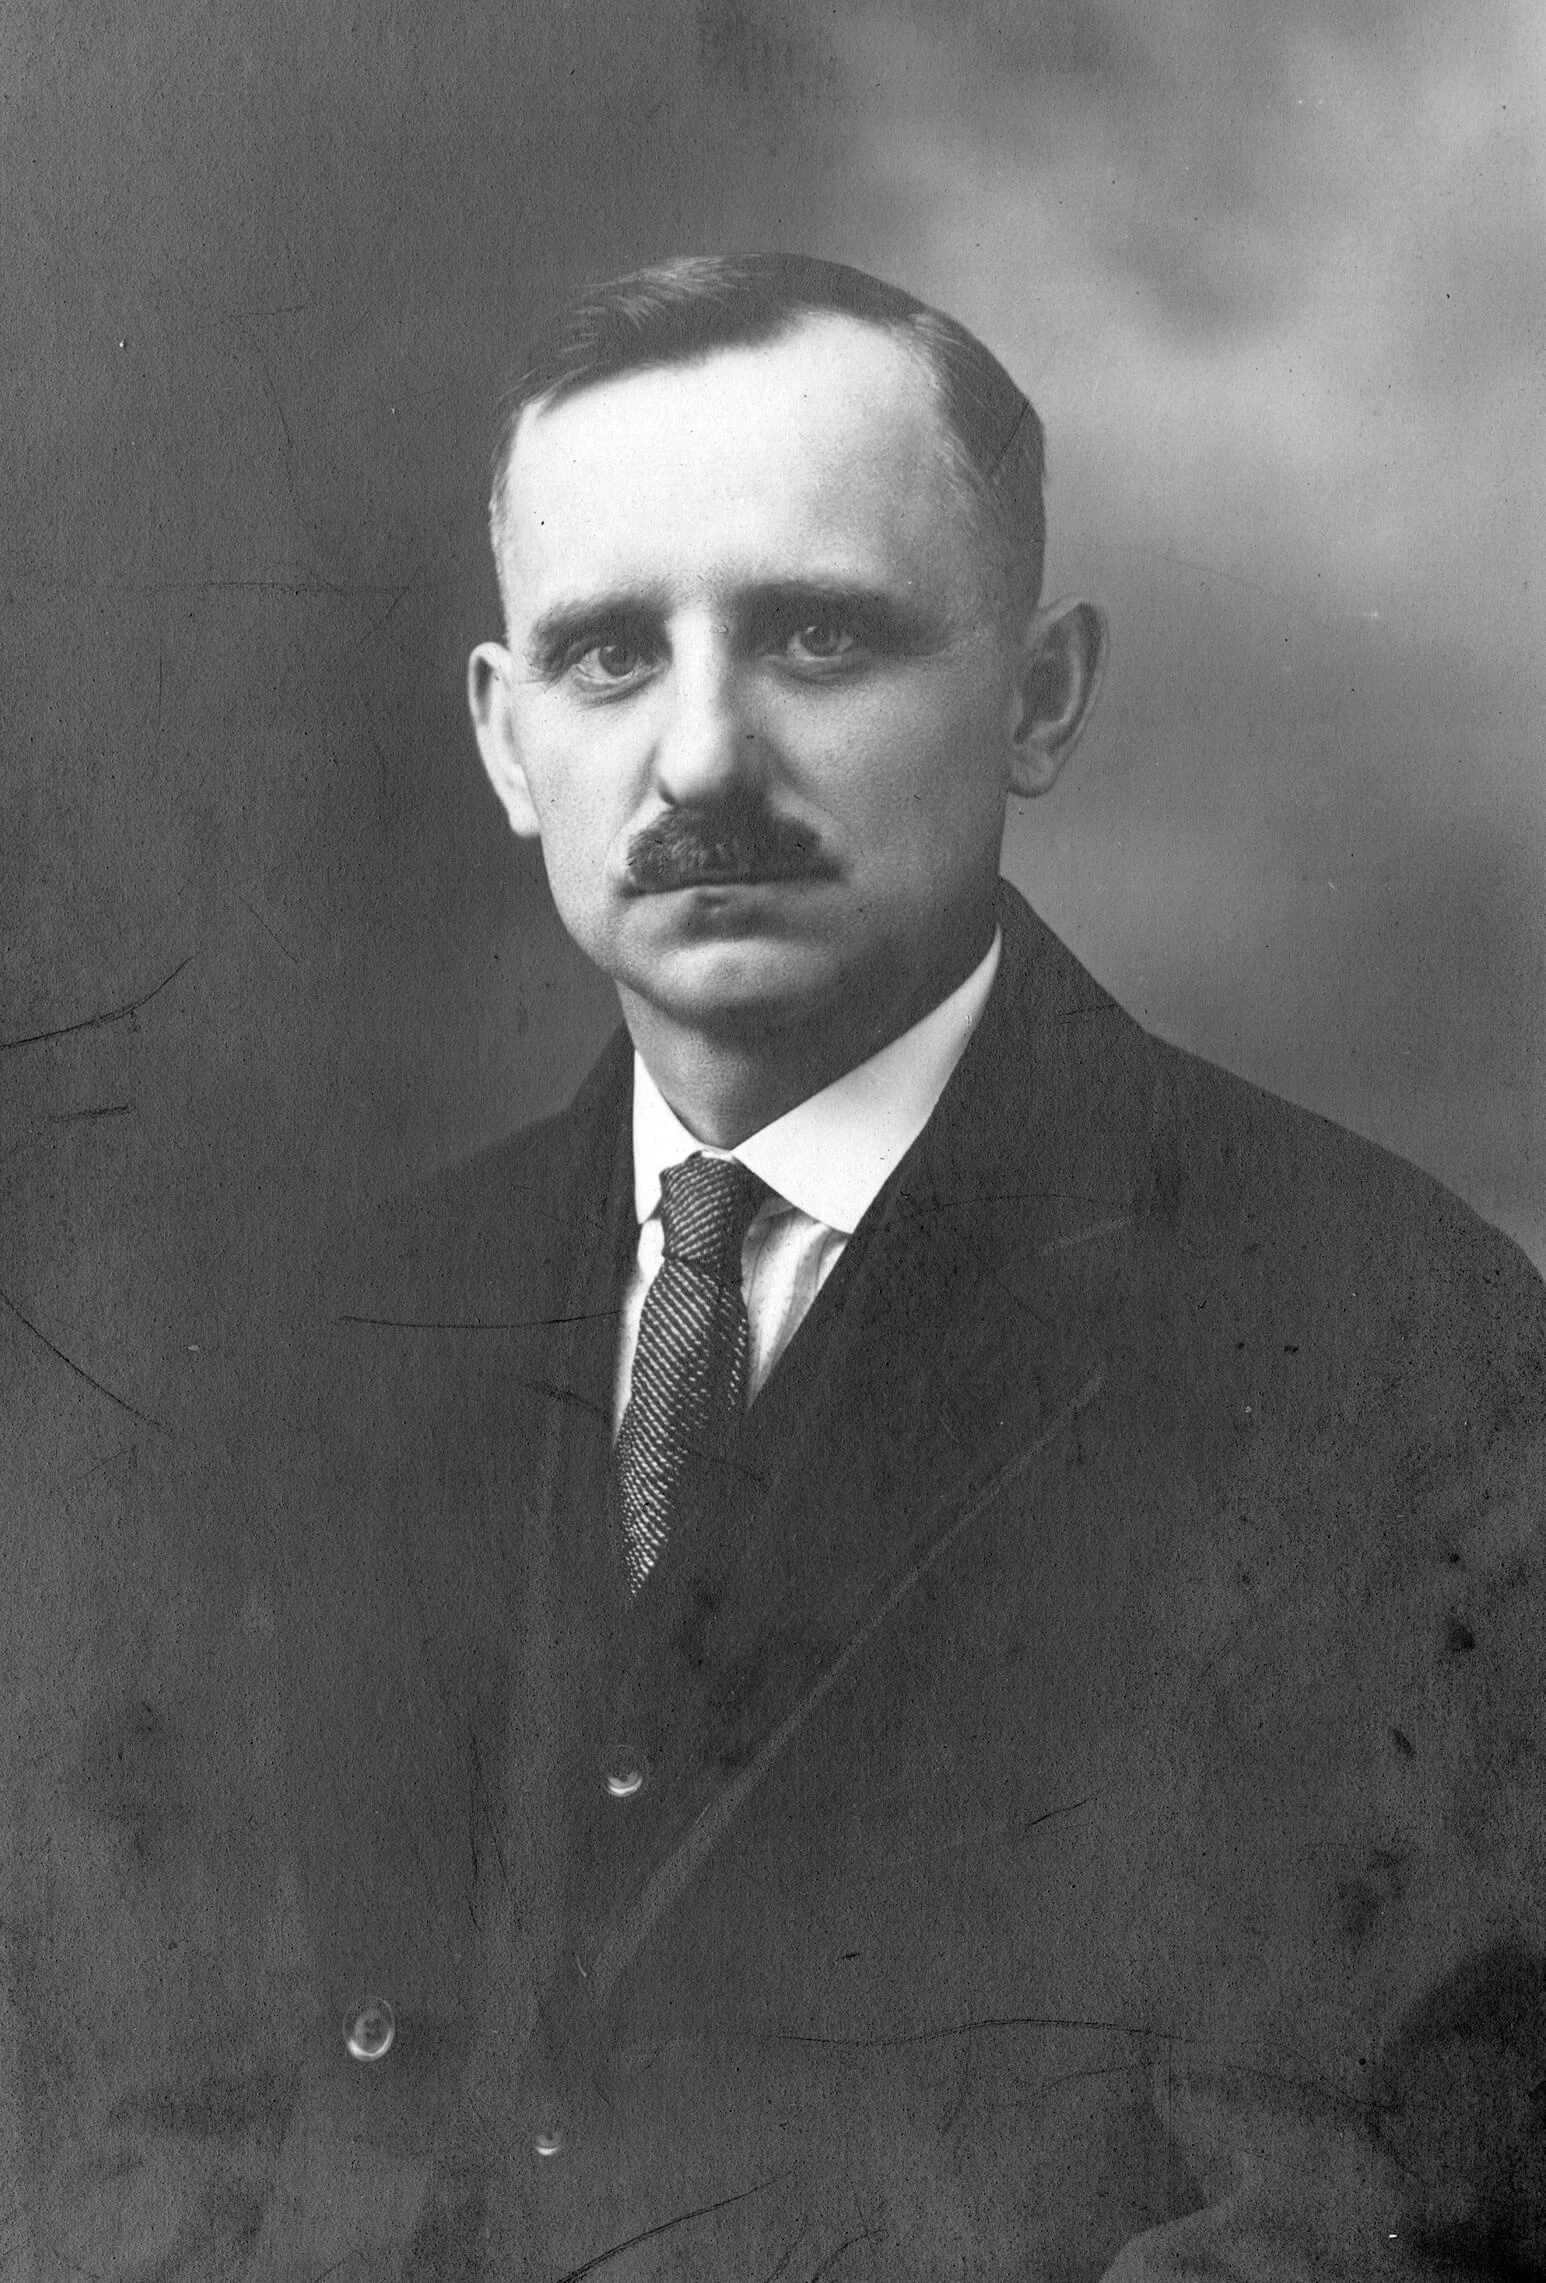 Black and white portrait of a young man in a suit, with thick mustache. He is staring into the camera with a serious face.